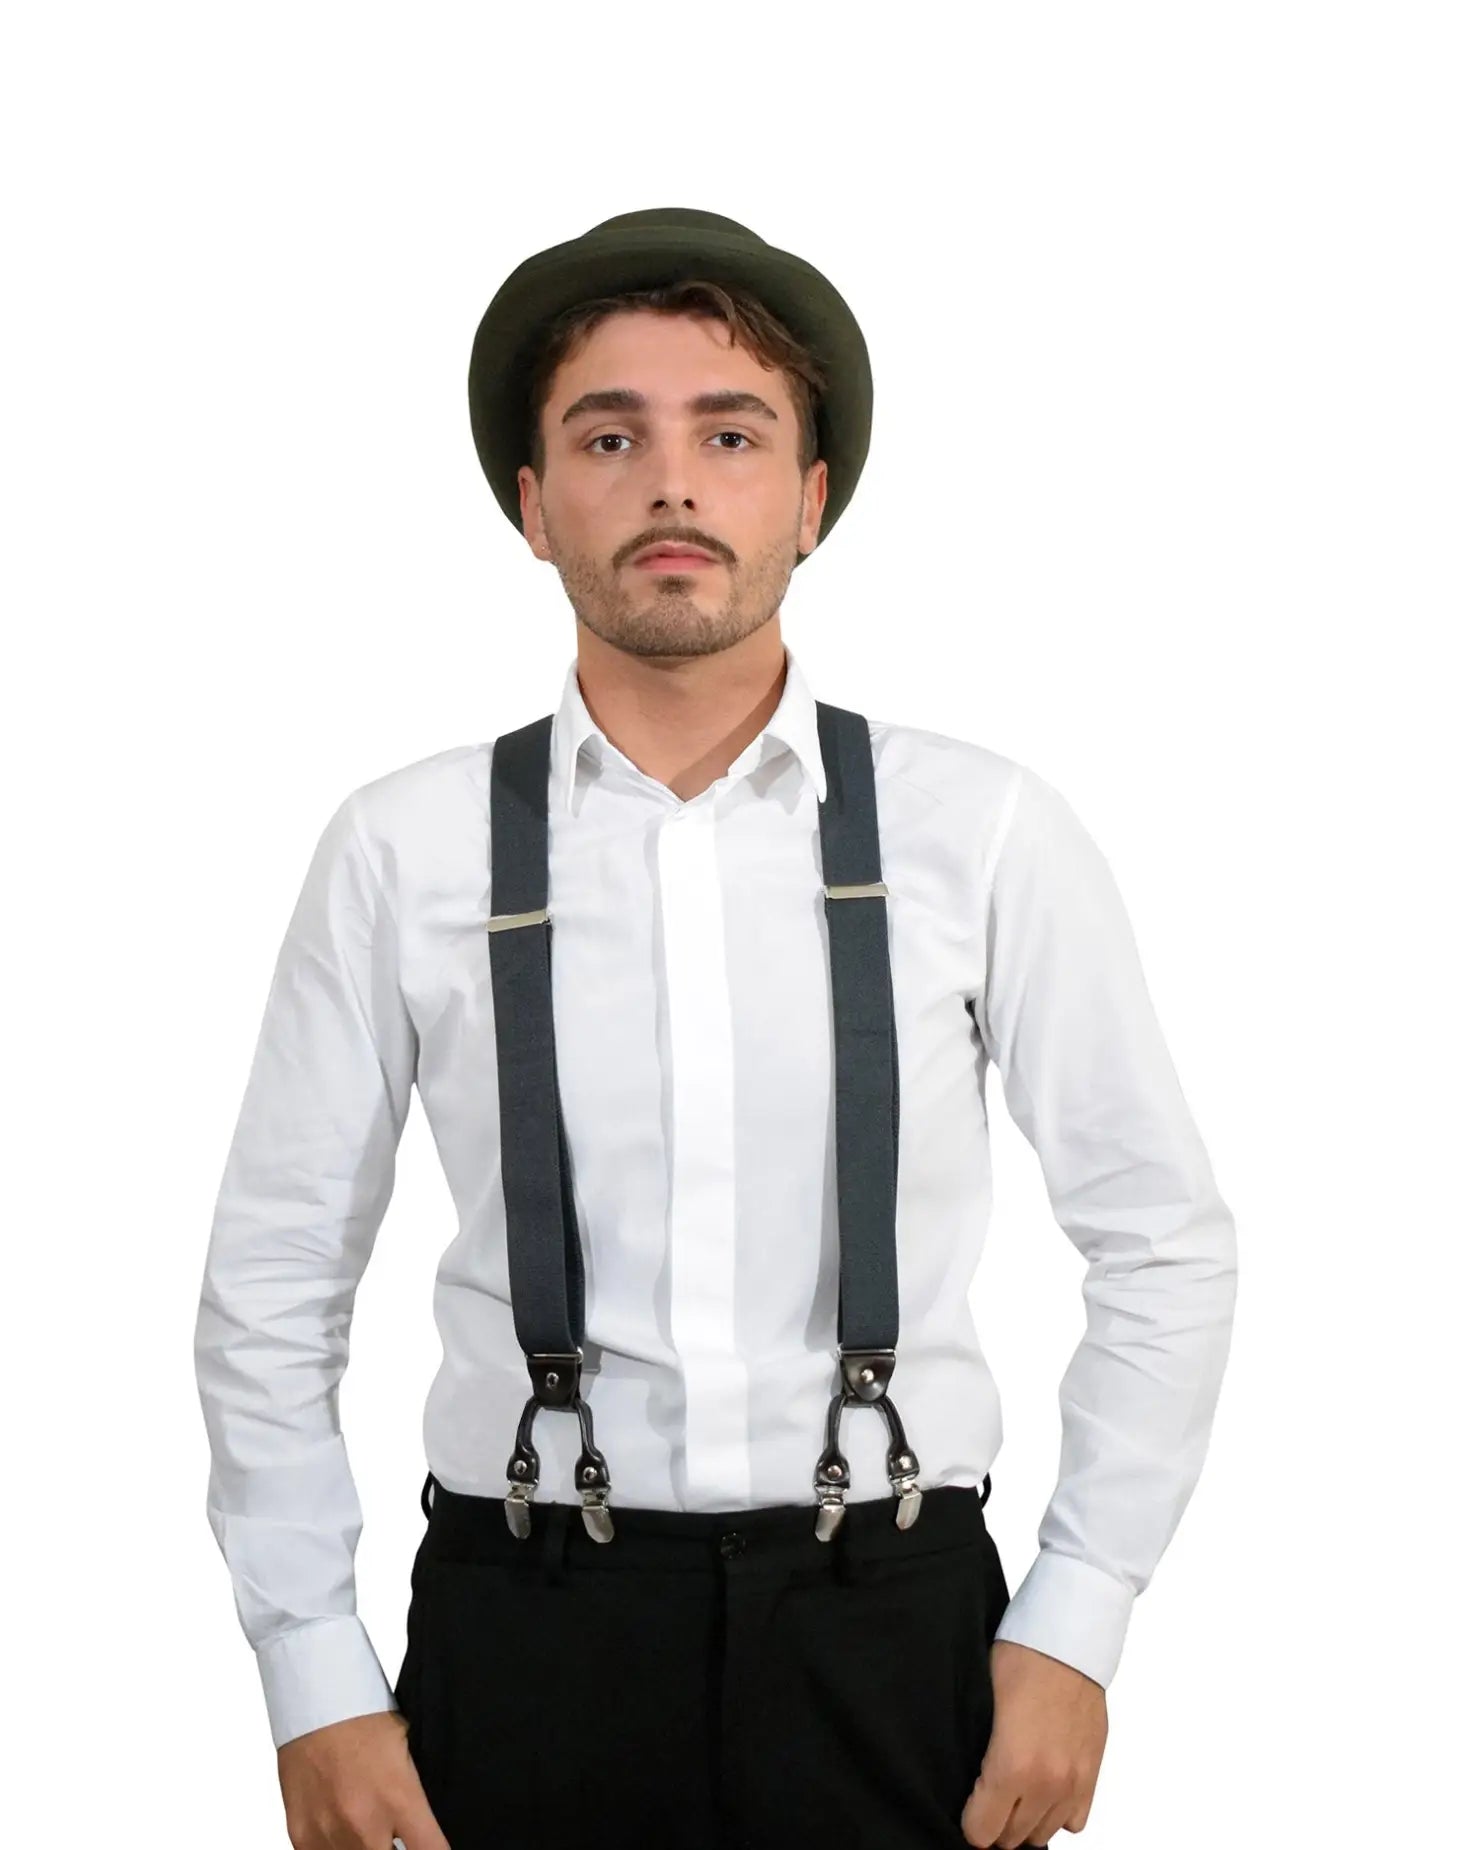 Bowler hat with black suspenders on man in white shirt